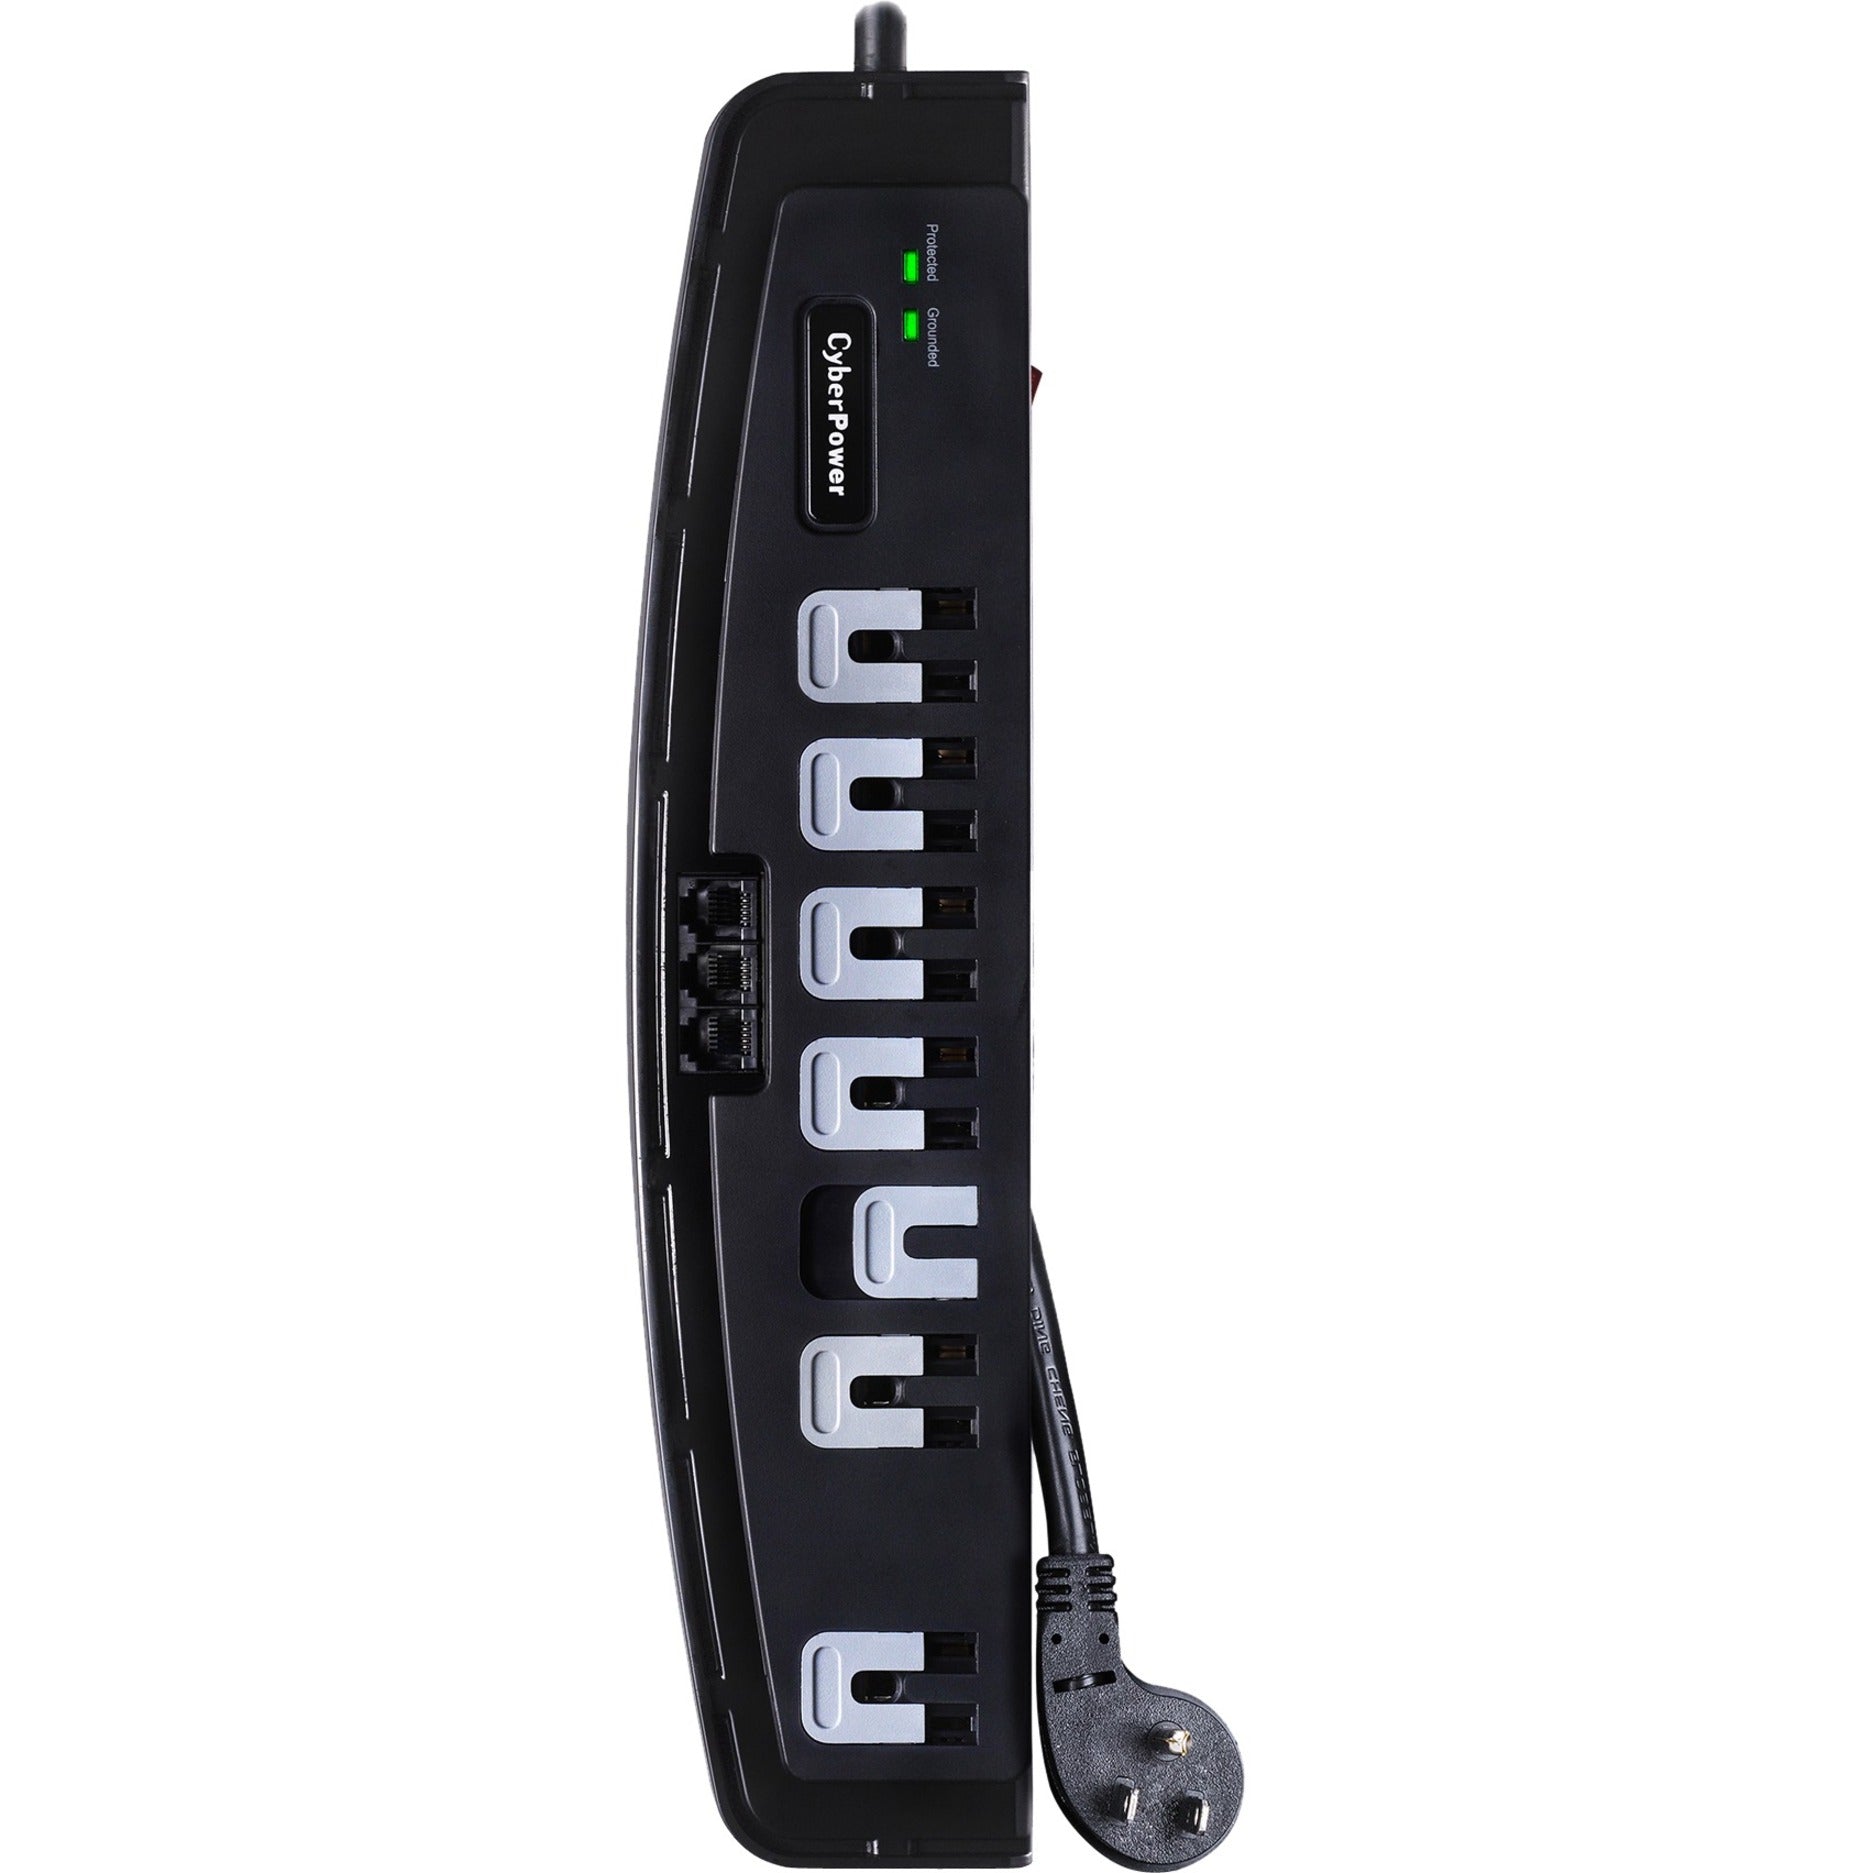 CyberPower CSP708T Professional 7-Outlets Surge Suppressor 8FT Cord and TEL, Lifetime Warranty, 1650 J